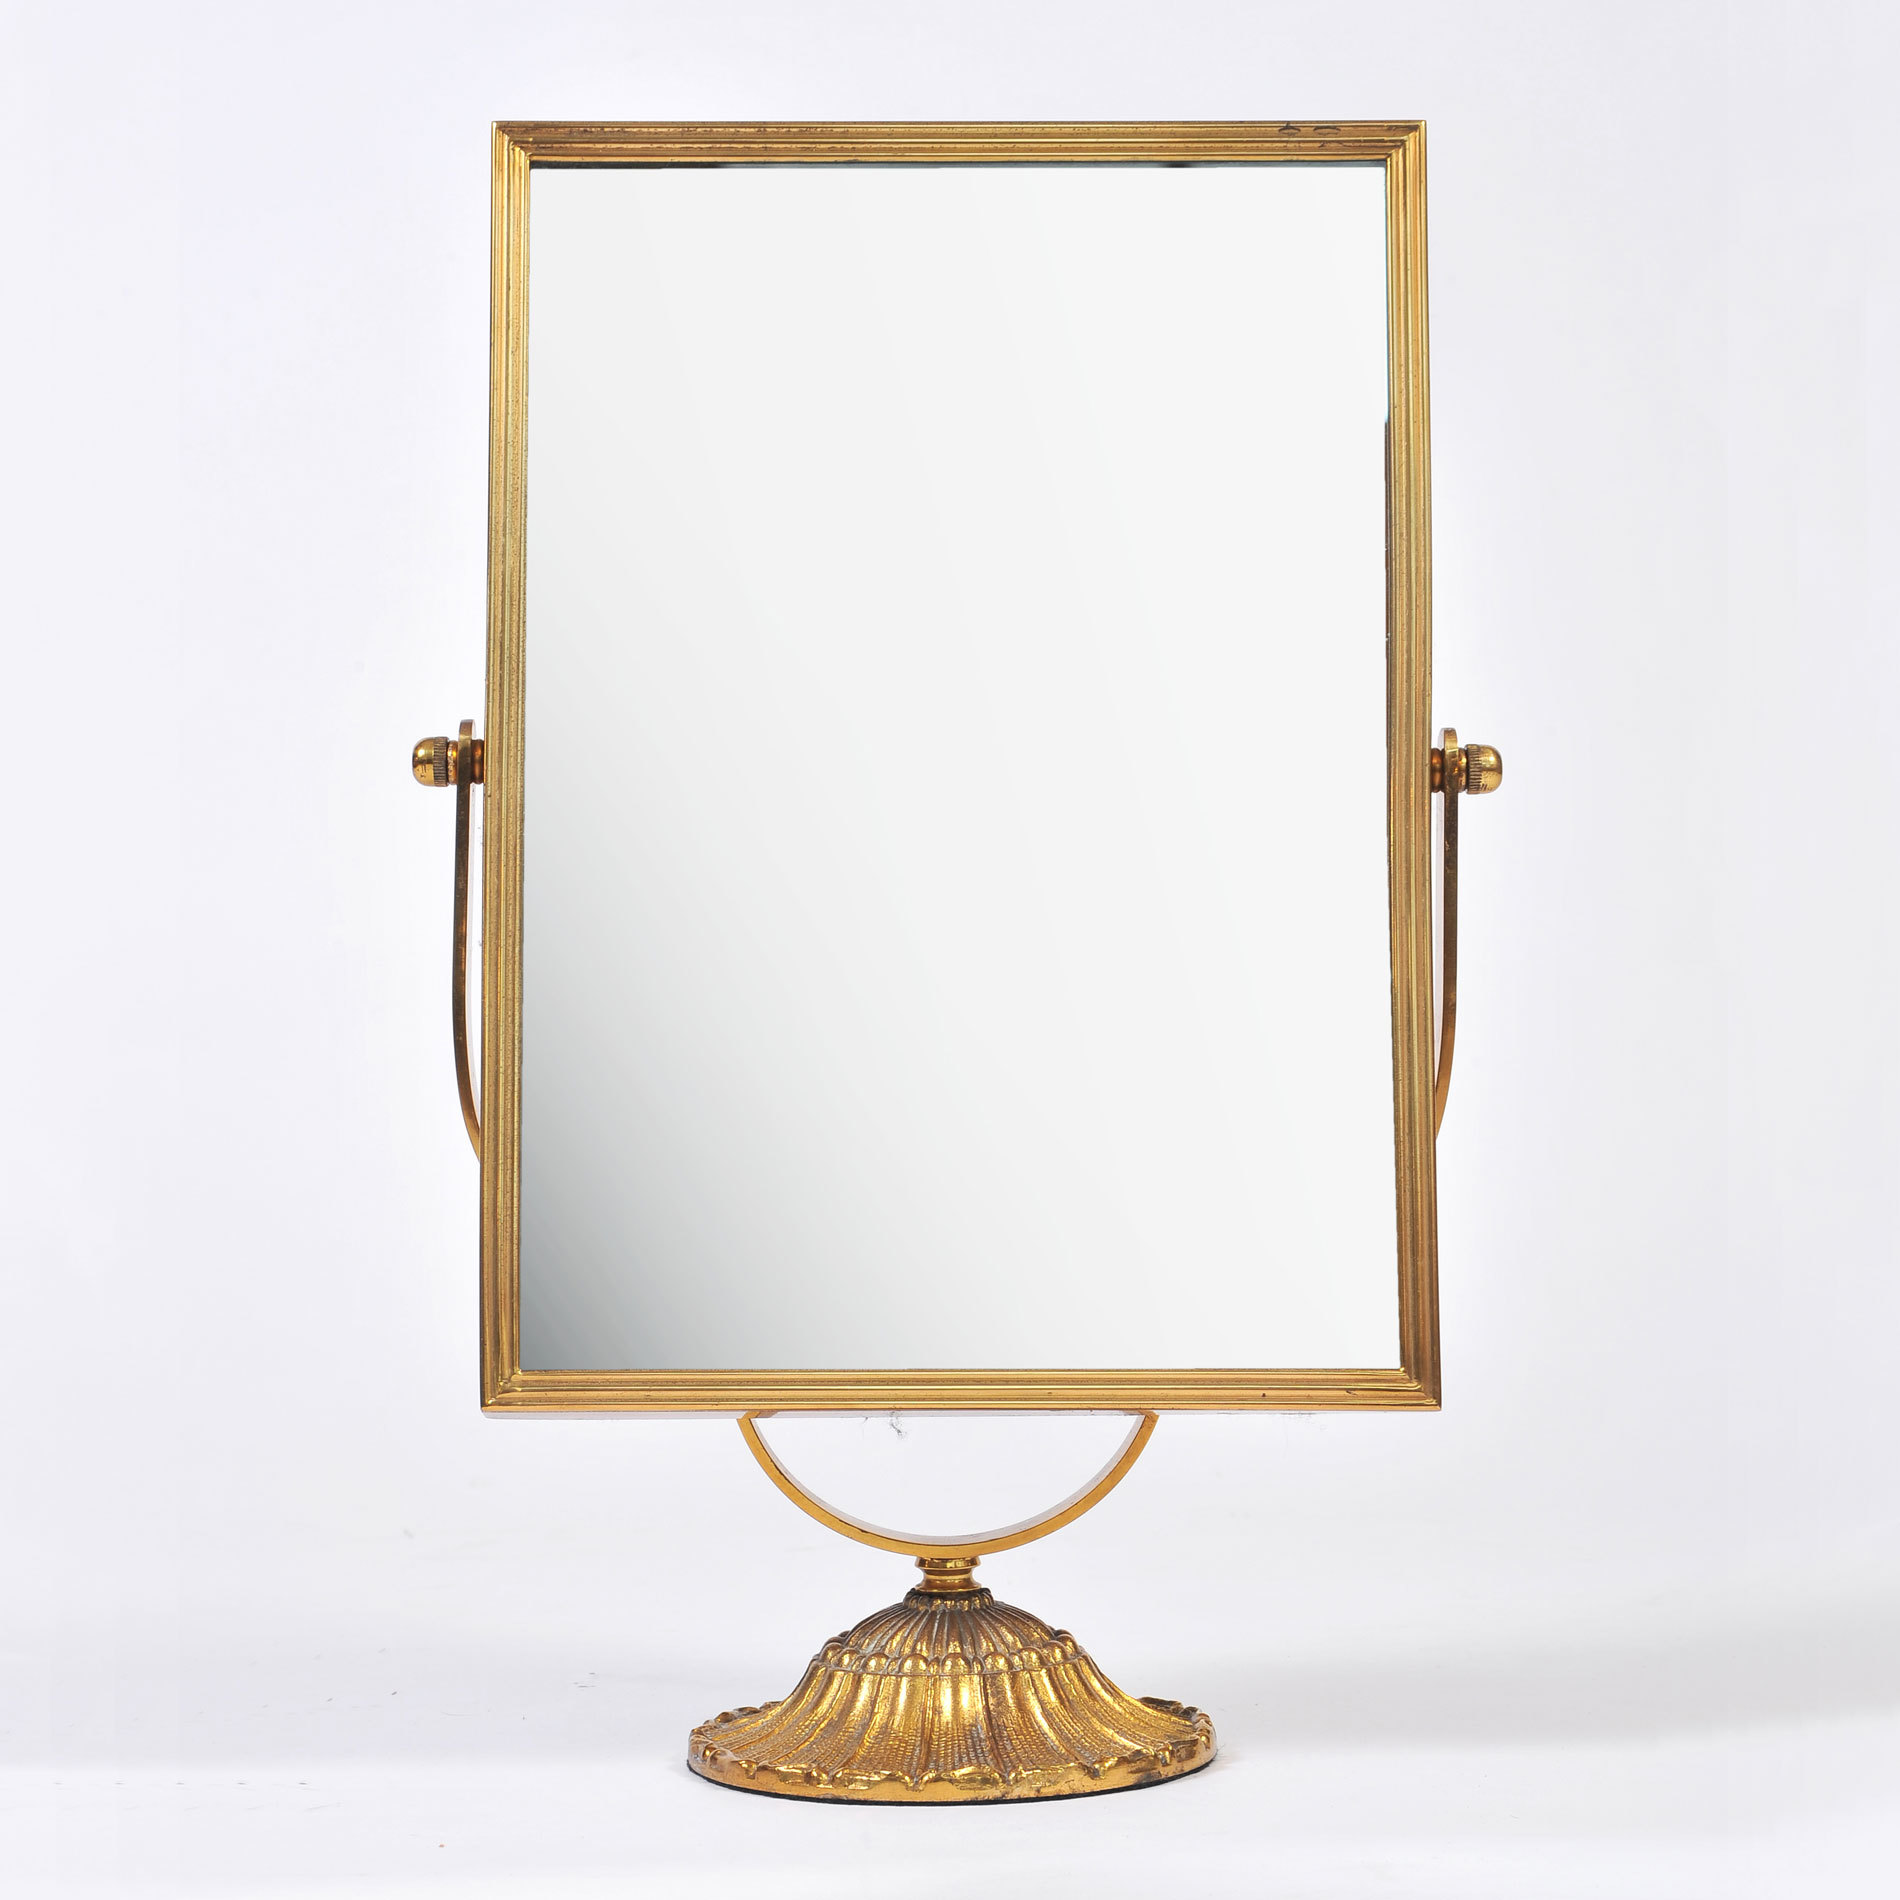 The image for Rectangular Brass Table Mirror 01